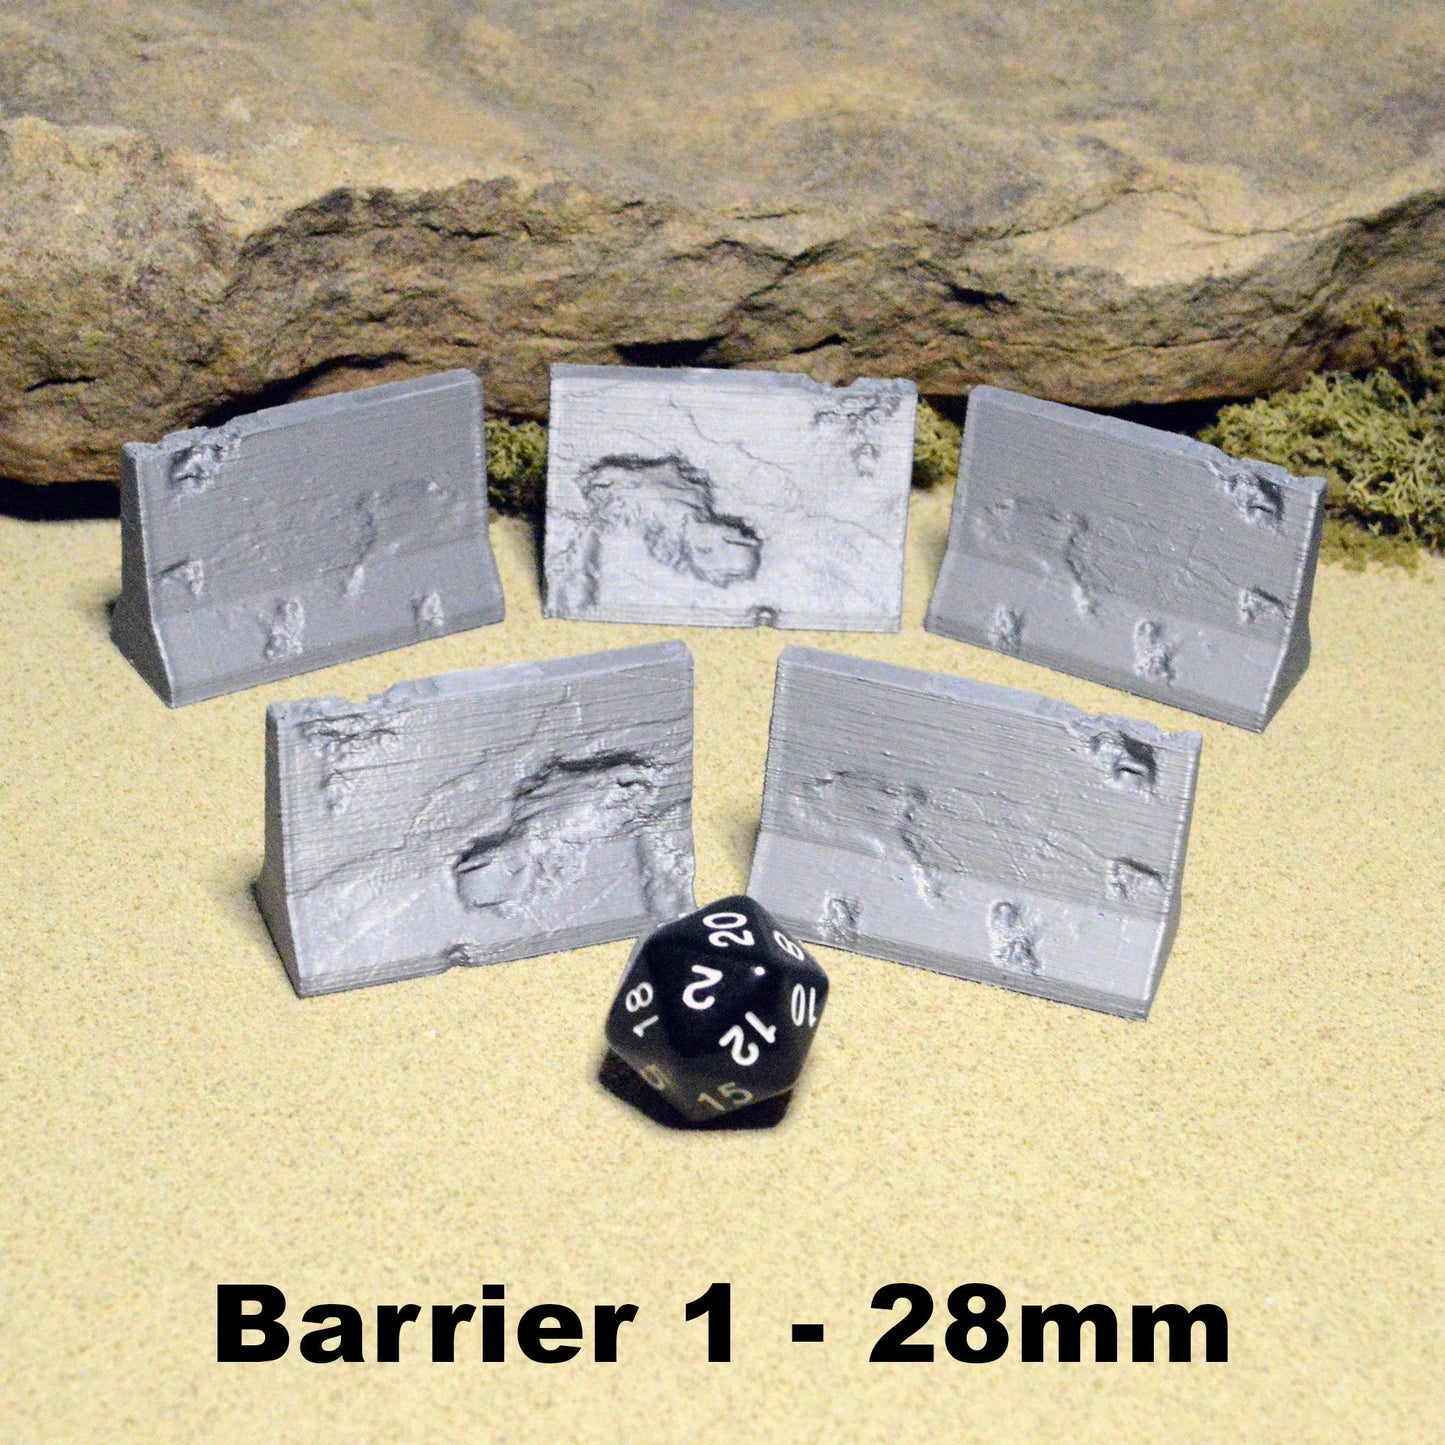 Miniature Jersey Barriers for Gaslands Terrain 15mm 20mm 28mm 32mm, Road Barriers for Urban Fallout Post-Apocalyptic, City Street Barricades